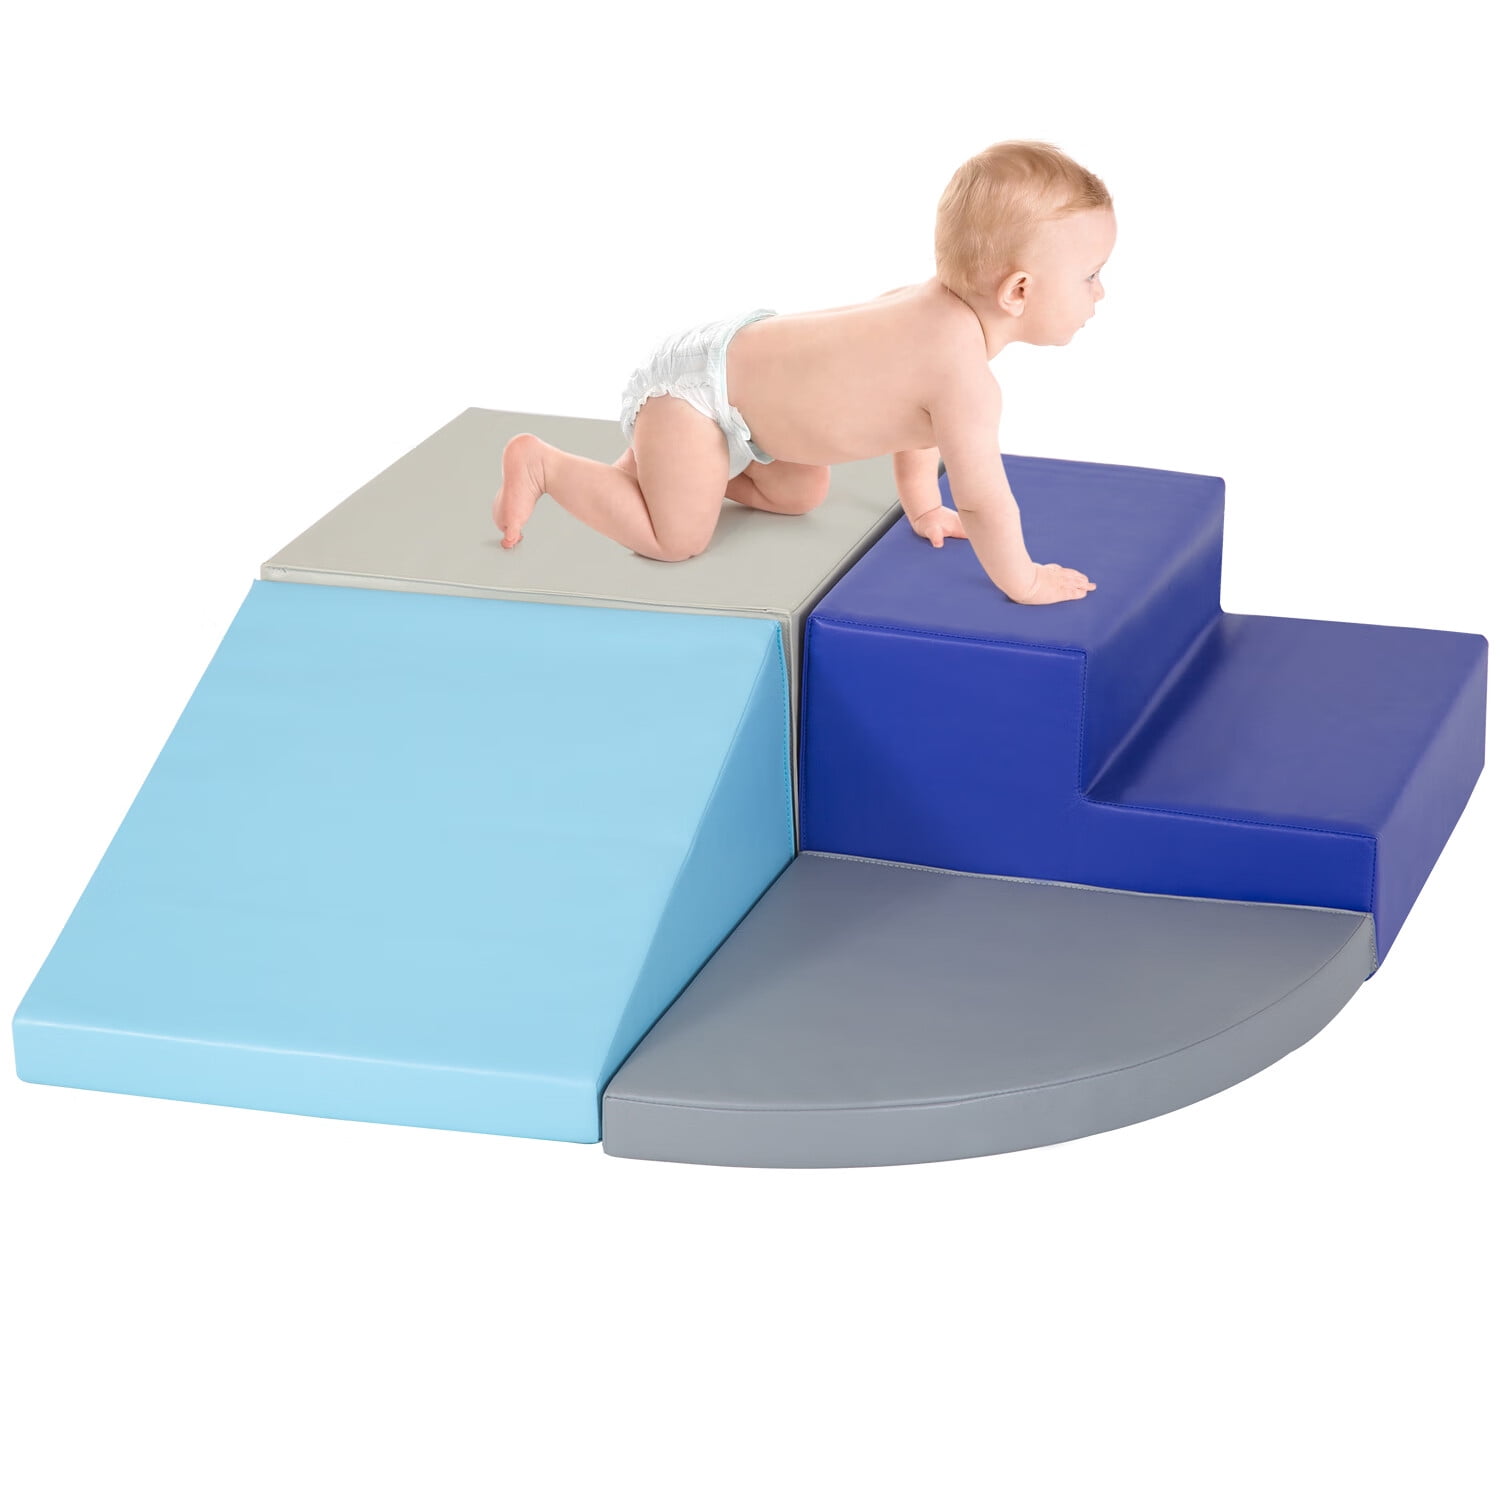 4 Pieces Foam Blocks Activity Set with Velcro BAHOM Climb and Crawl Activity Set for Baby Infants Indoor Anti-Slip and Colorful 